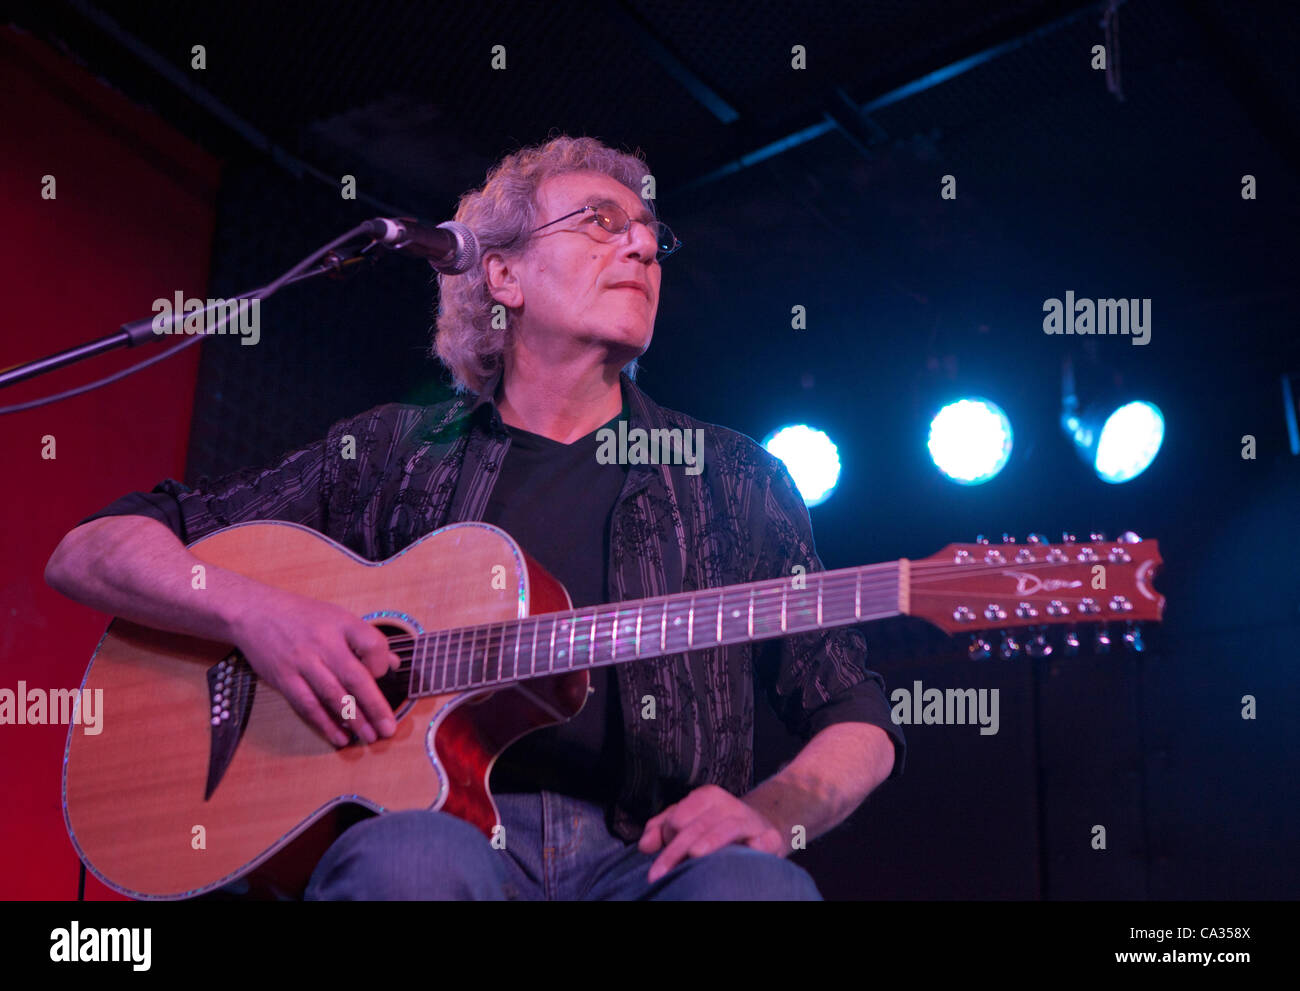 ROME, ITALY, THURSDAY, MARCH 29TH 2012. Seventies folk rock group Strawbs play an acustic gig in Rome. Their only concert in Rome since 1973. Pictured guitarist Chas Cronk. Stock Photo